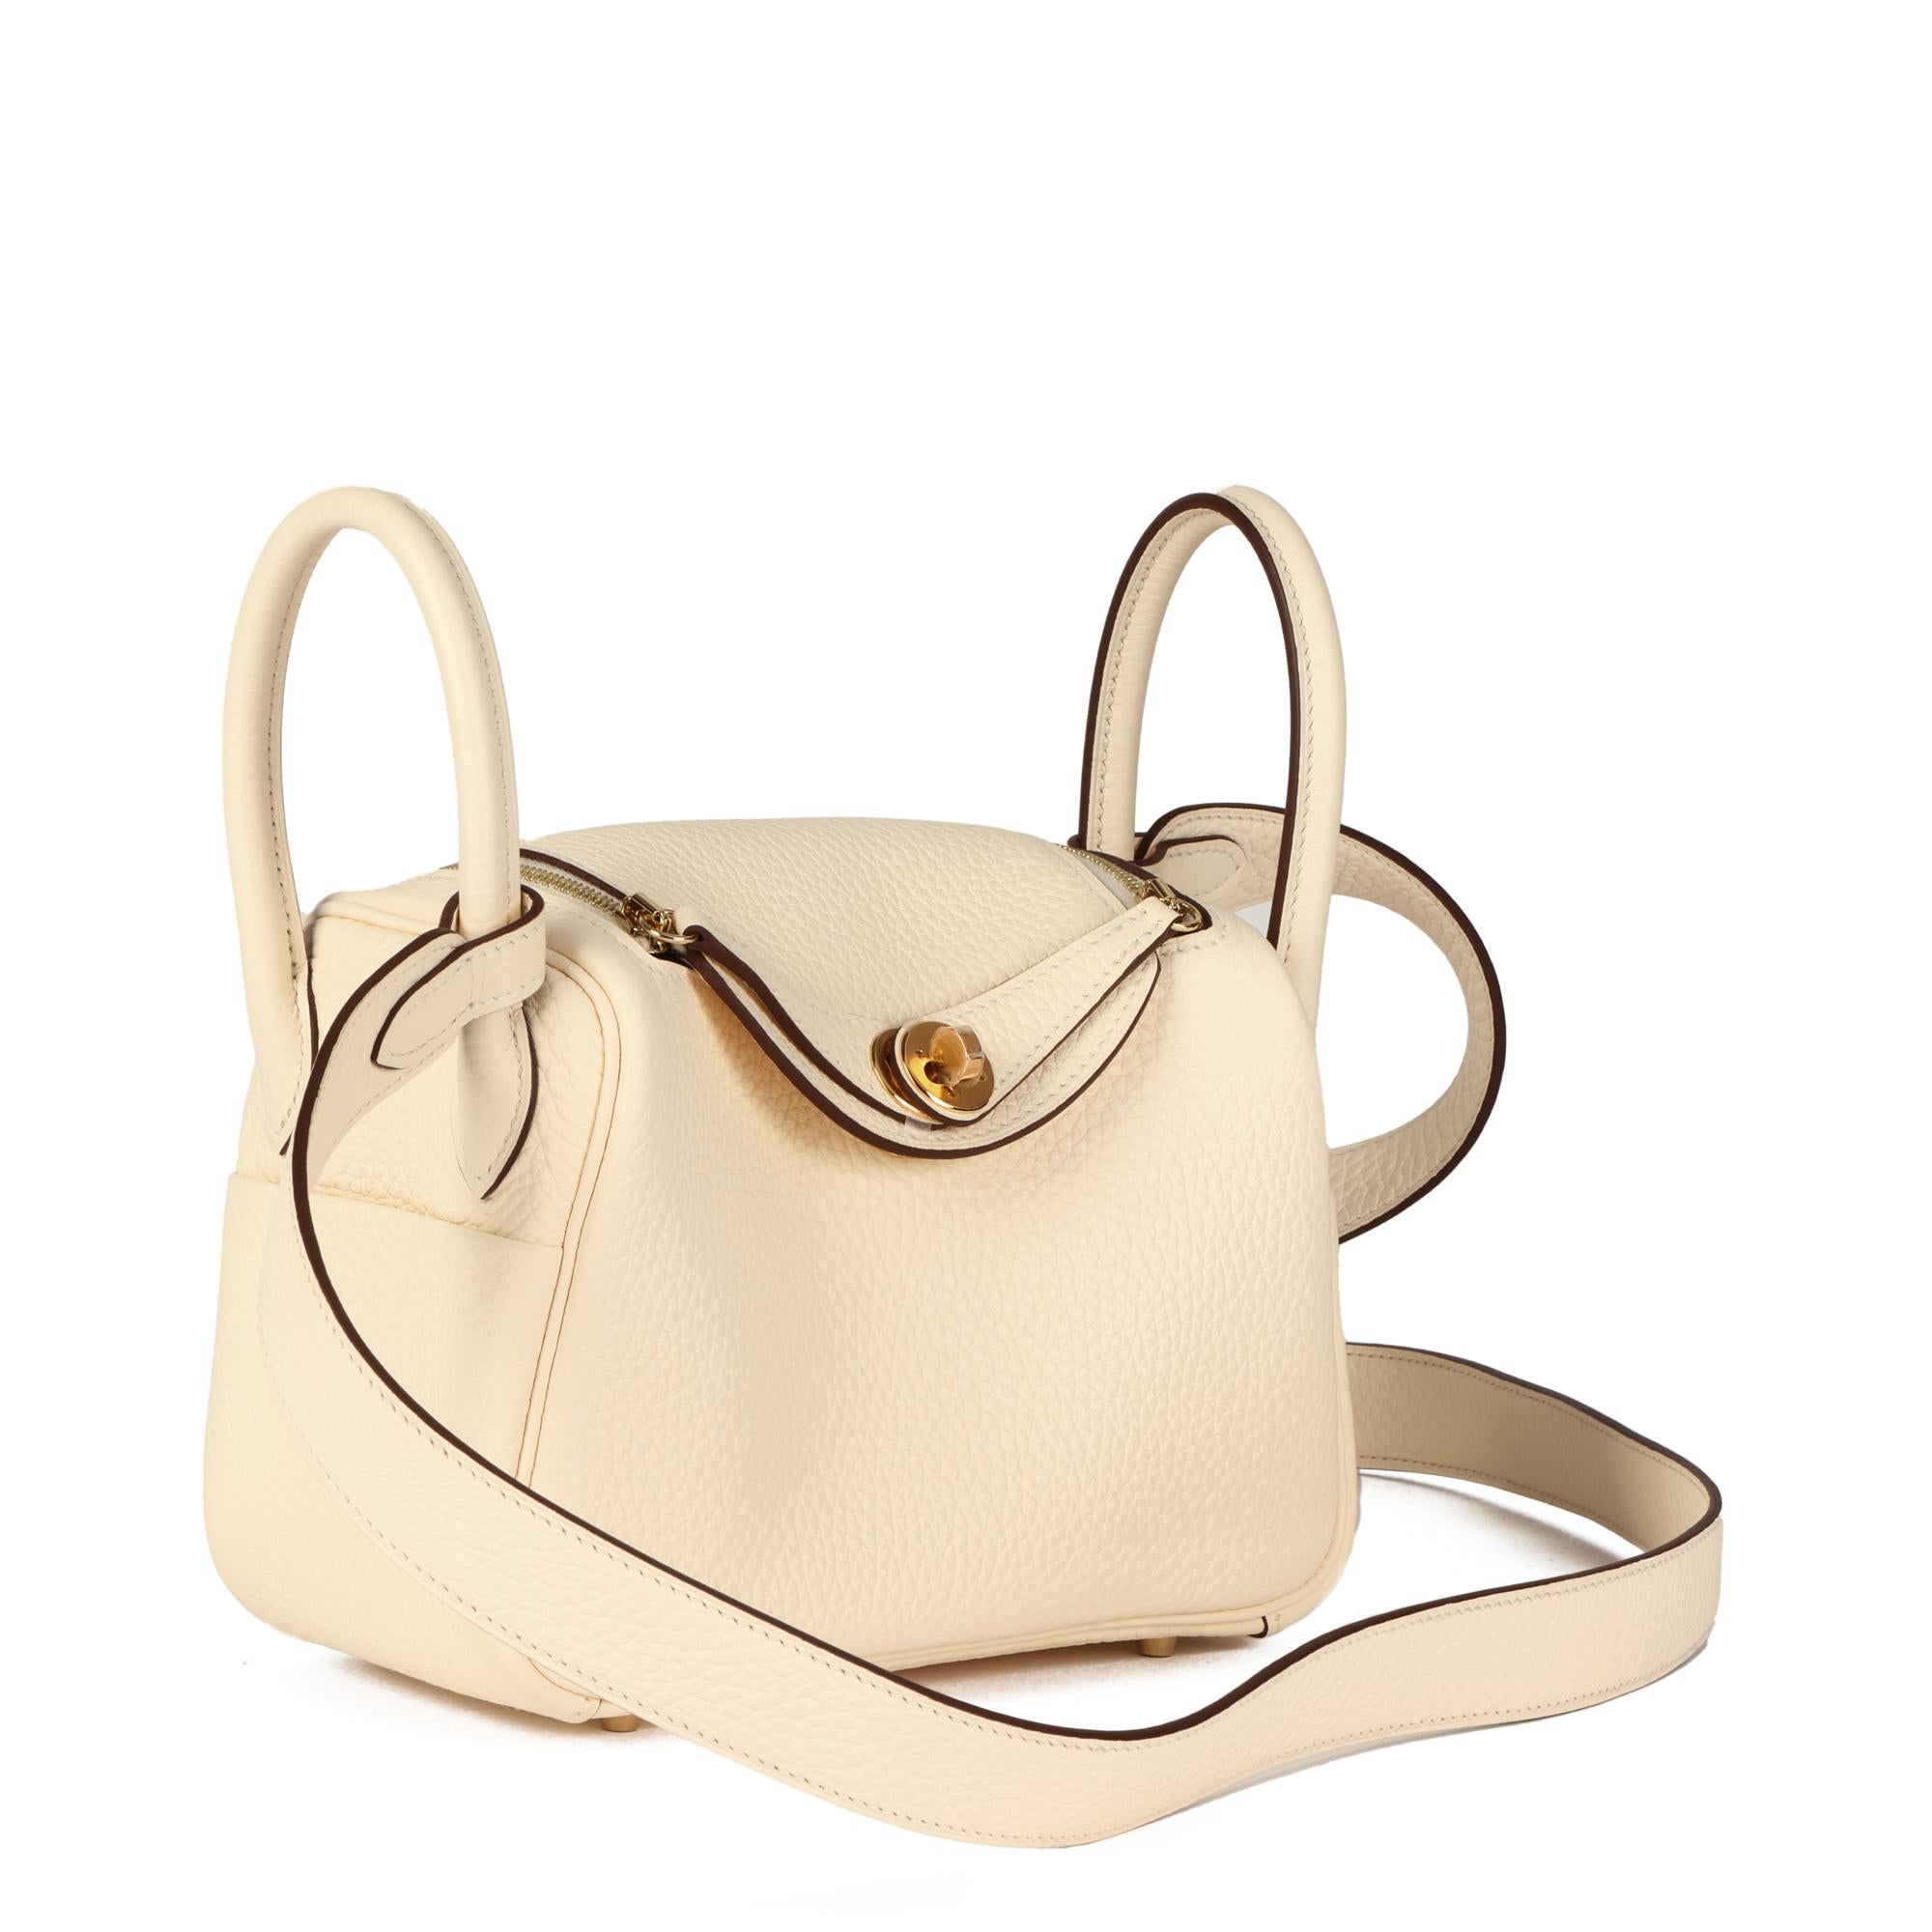 Hermès Nata Clemence Leather Mini Lindy

CONDITION NOTES
This item is in unworn condition.

BRAND	Hermès
MODEL	Mini Lindy
AGE	2022
GENDER	Women's
MATERIAL(S)	Clemence Leather
COLOUR	Beige
BRAND COLOUR	Nata
HARDWARE	Gold
INTERIOR	Beige